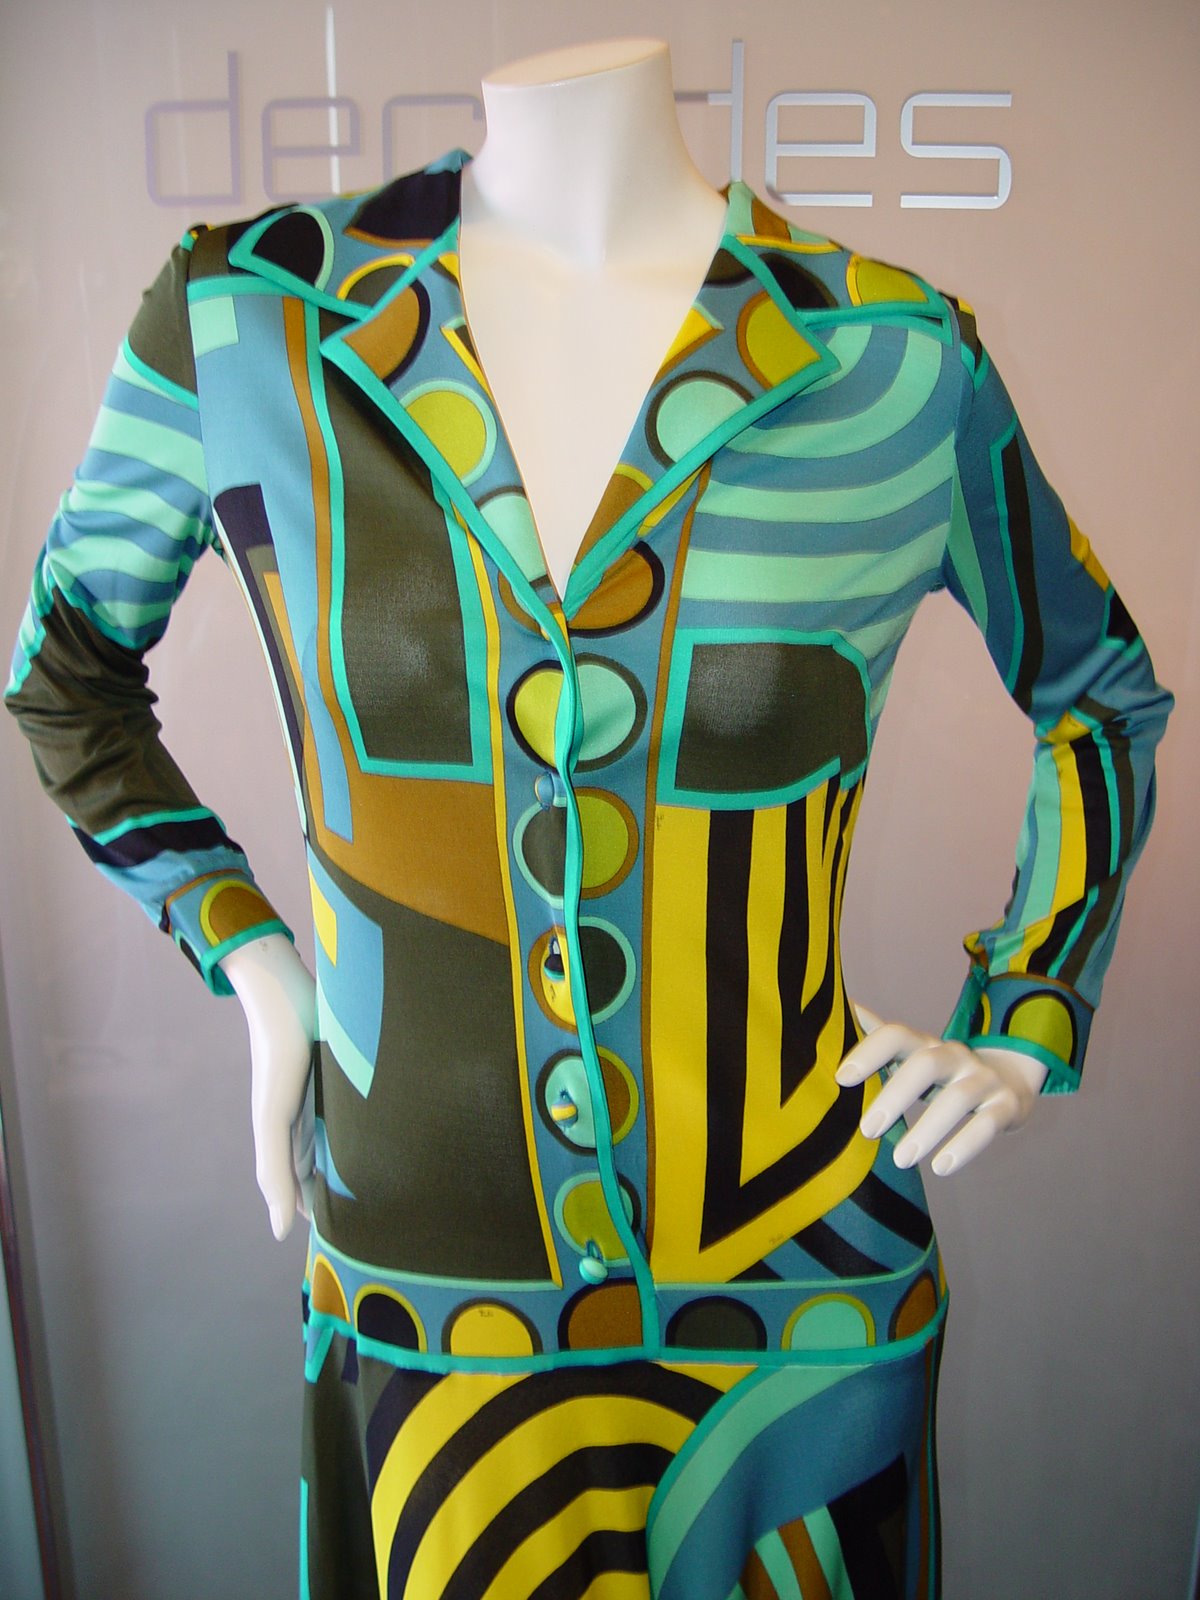 [EMILIO+PUCCI+FOR+LORD+AND+TAYLOR+BLUE+AND+ACID+YELLOW+SILK+JERSEY+SHIRTMAKER+DRESS+WITH+DROP+WAIST+MARKED+SIZE+14+C+1960.JPG.JPG]